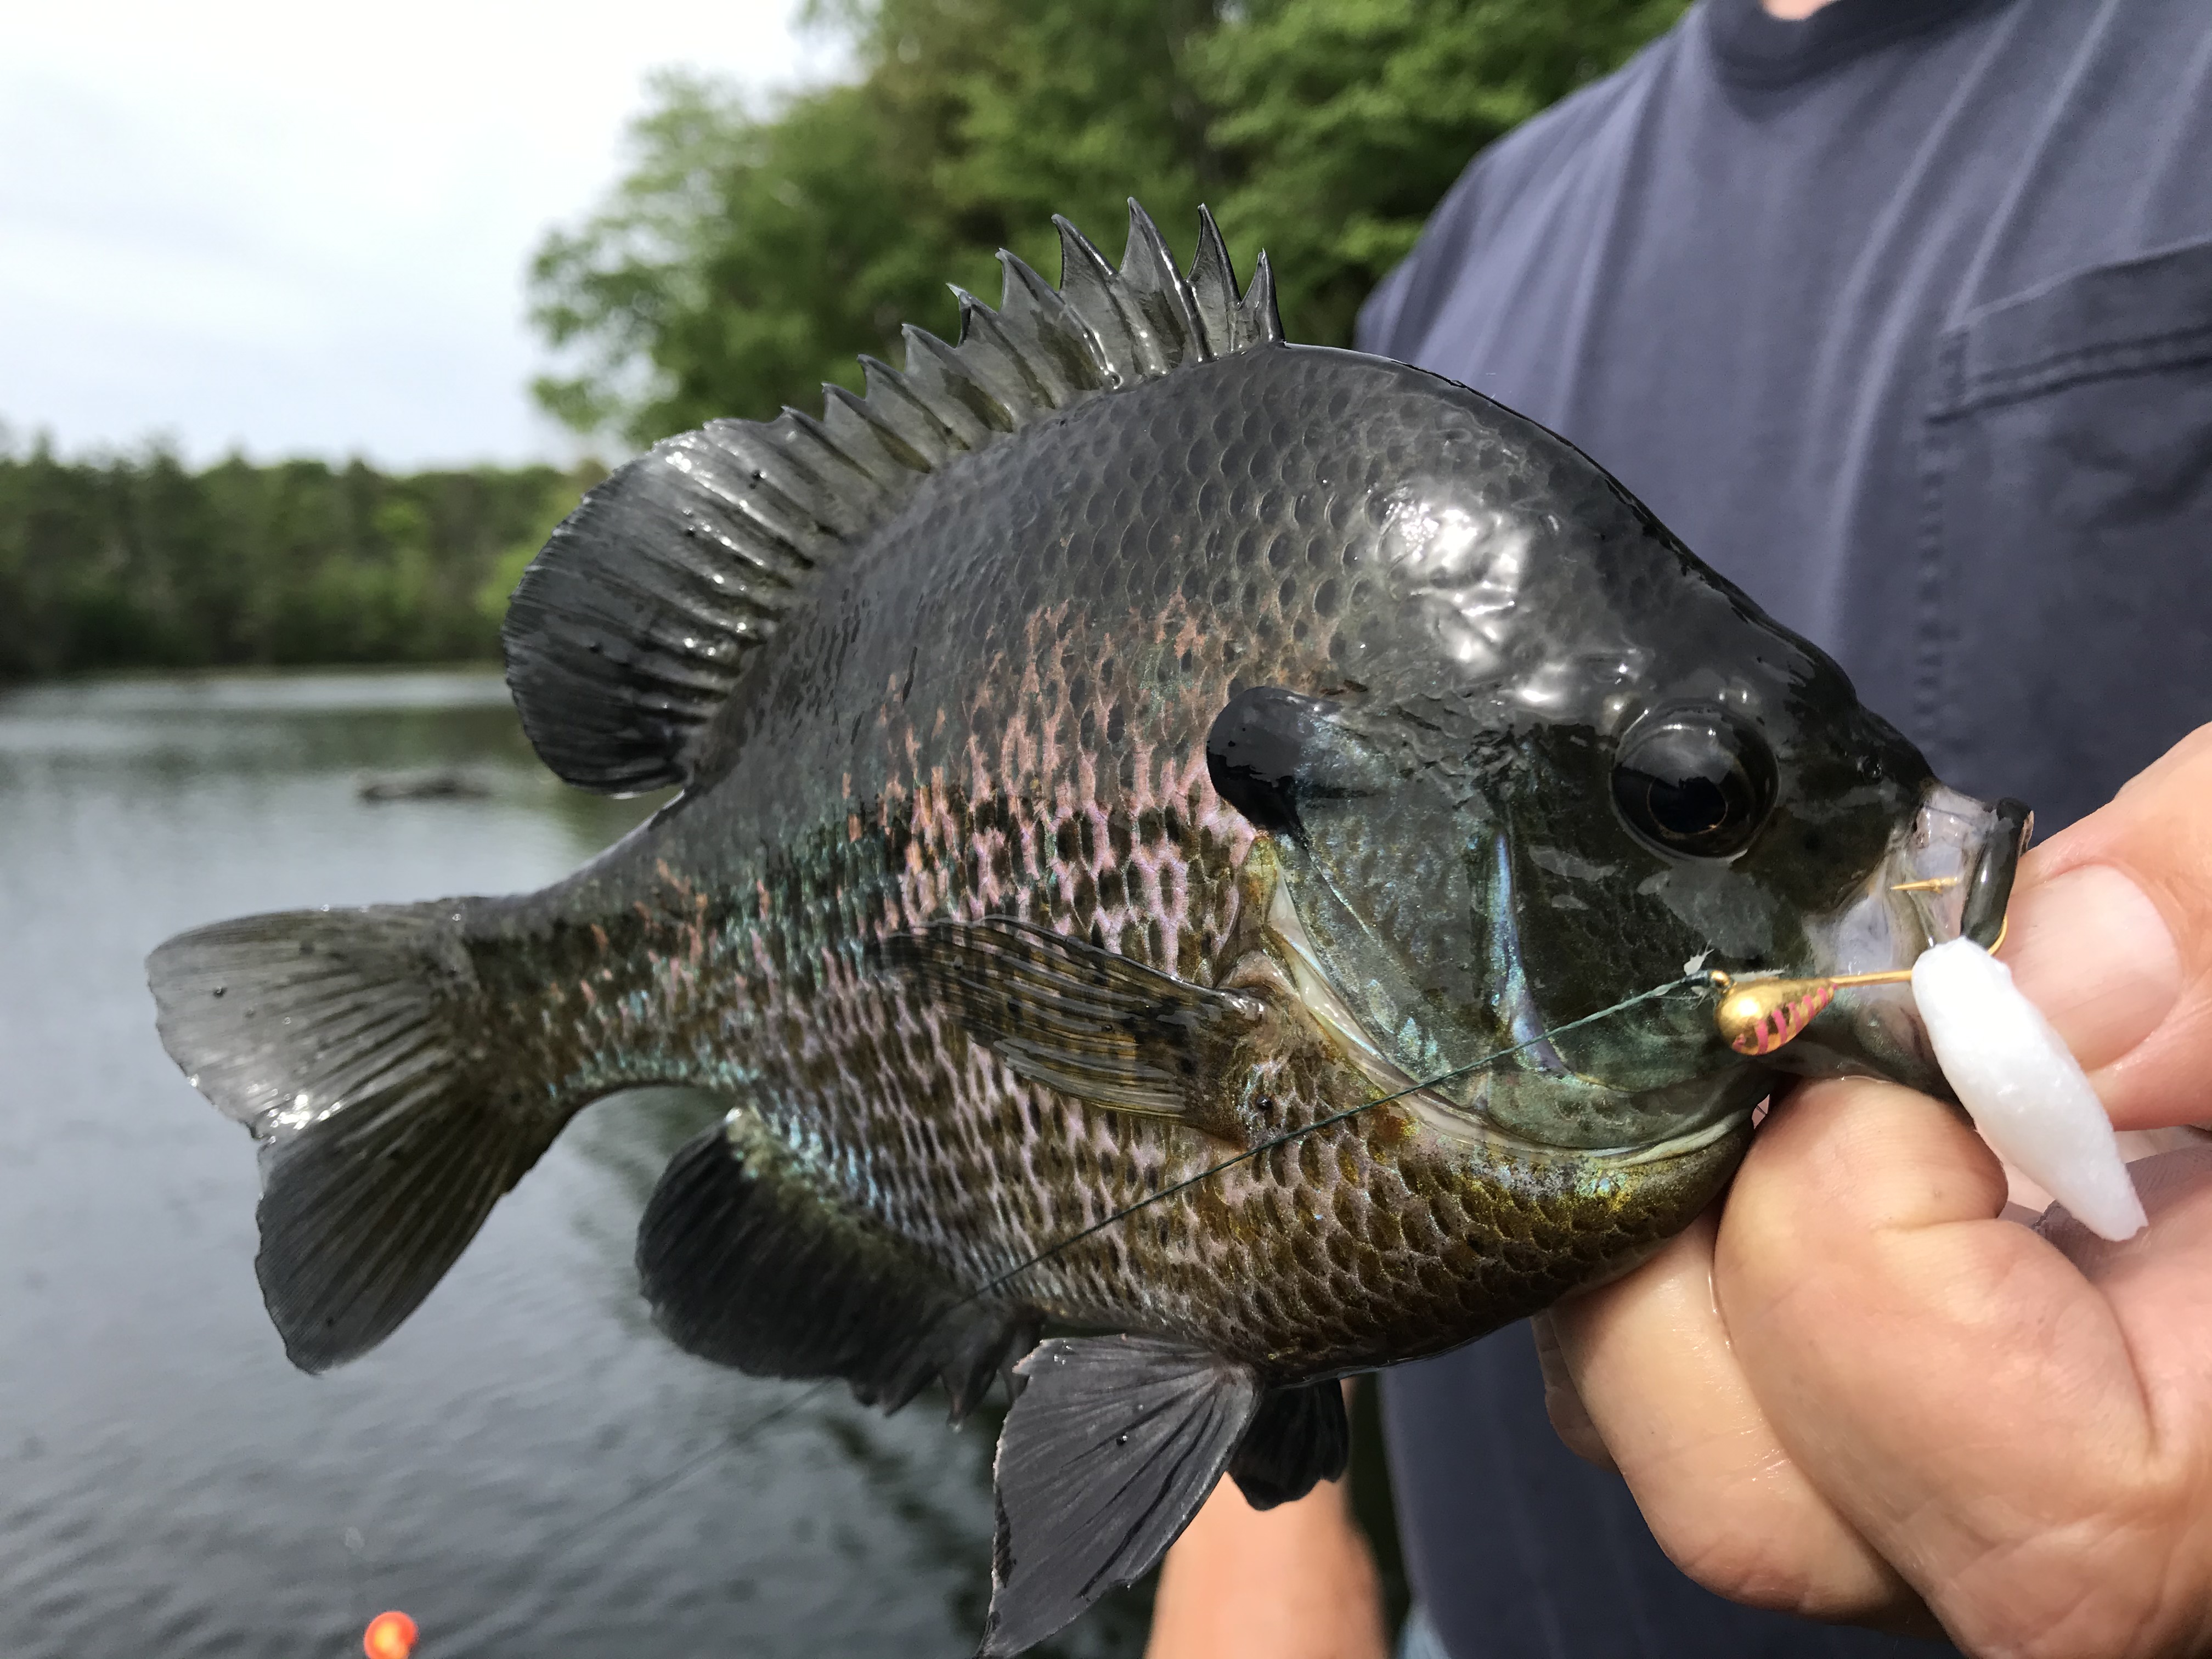 How to set up a fishing line for crappie/bluegill/sun fish